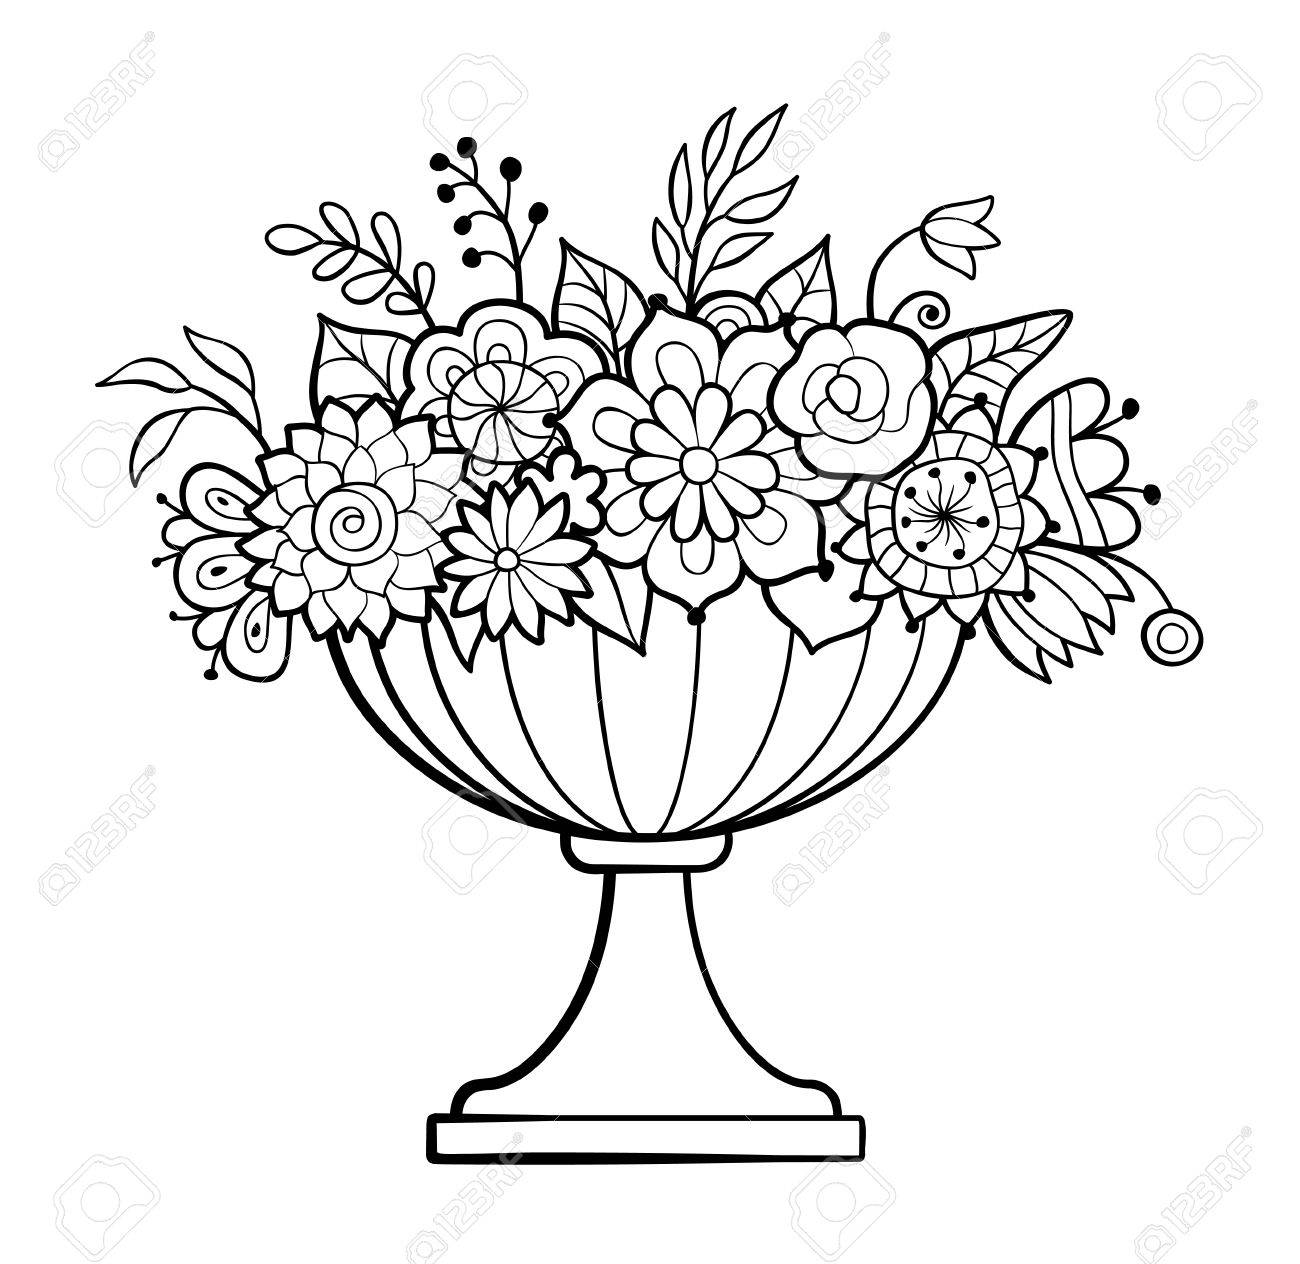 Vase with flowers big flower pot monochrome vector illustration antistress coloring page for adults royalty free svg cliparts vectors and stock illustration image